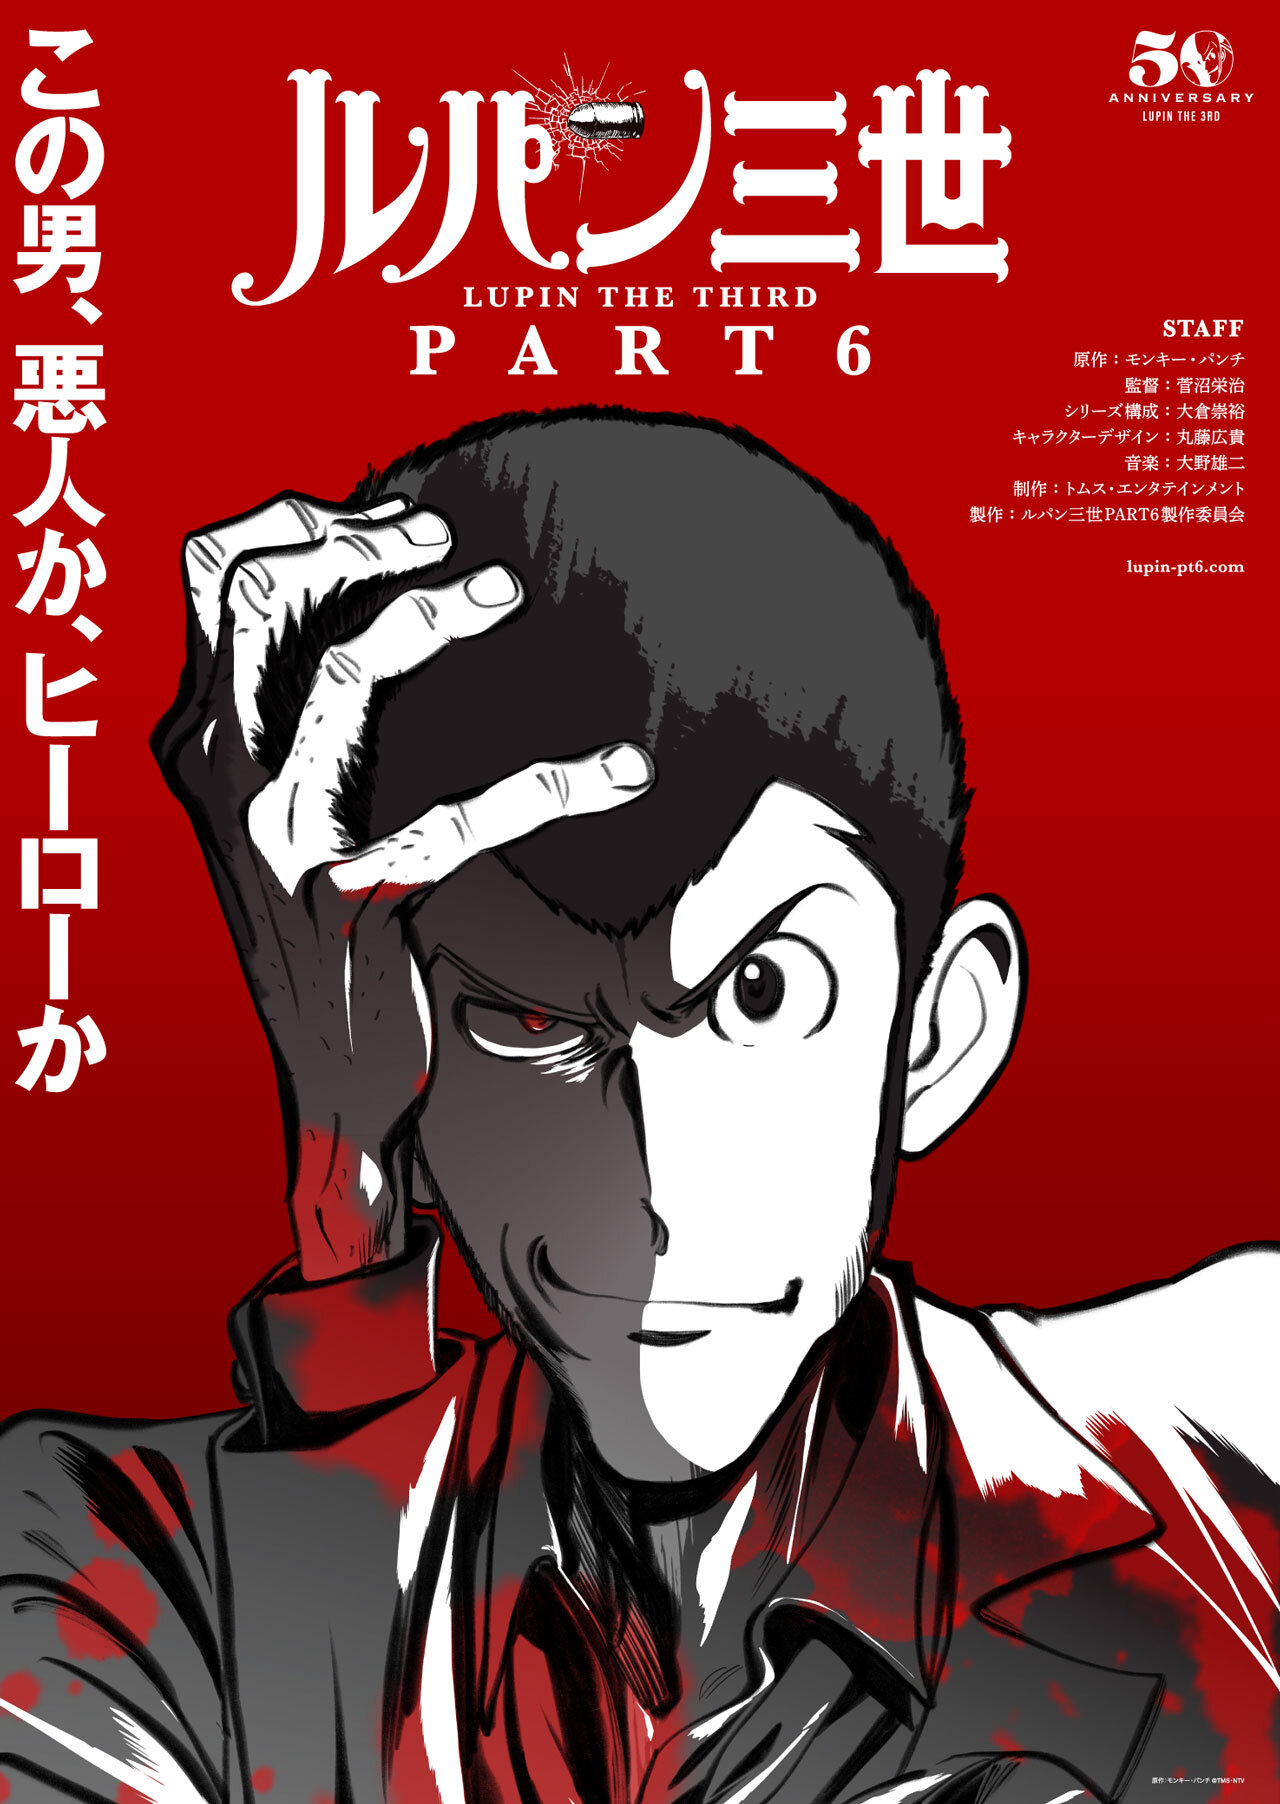 lupin parte 6 teaser